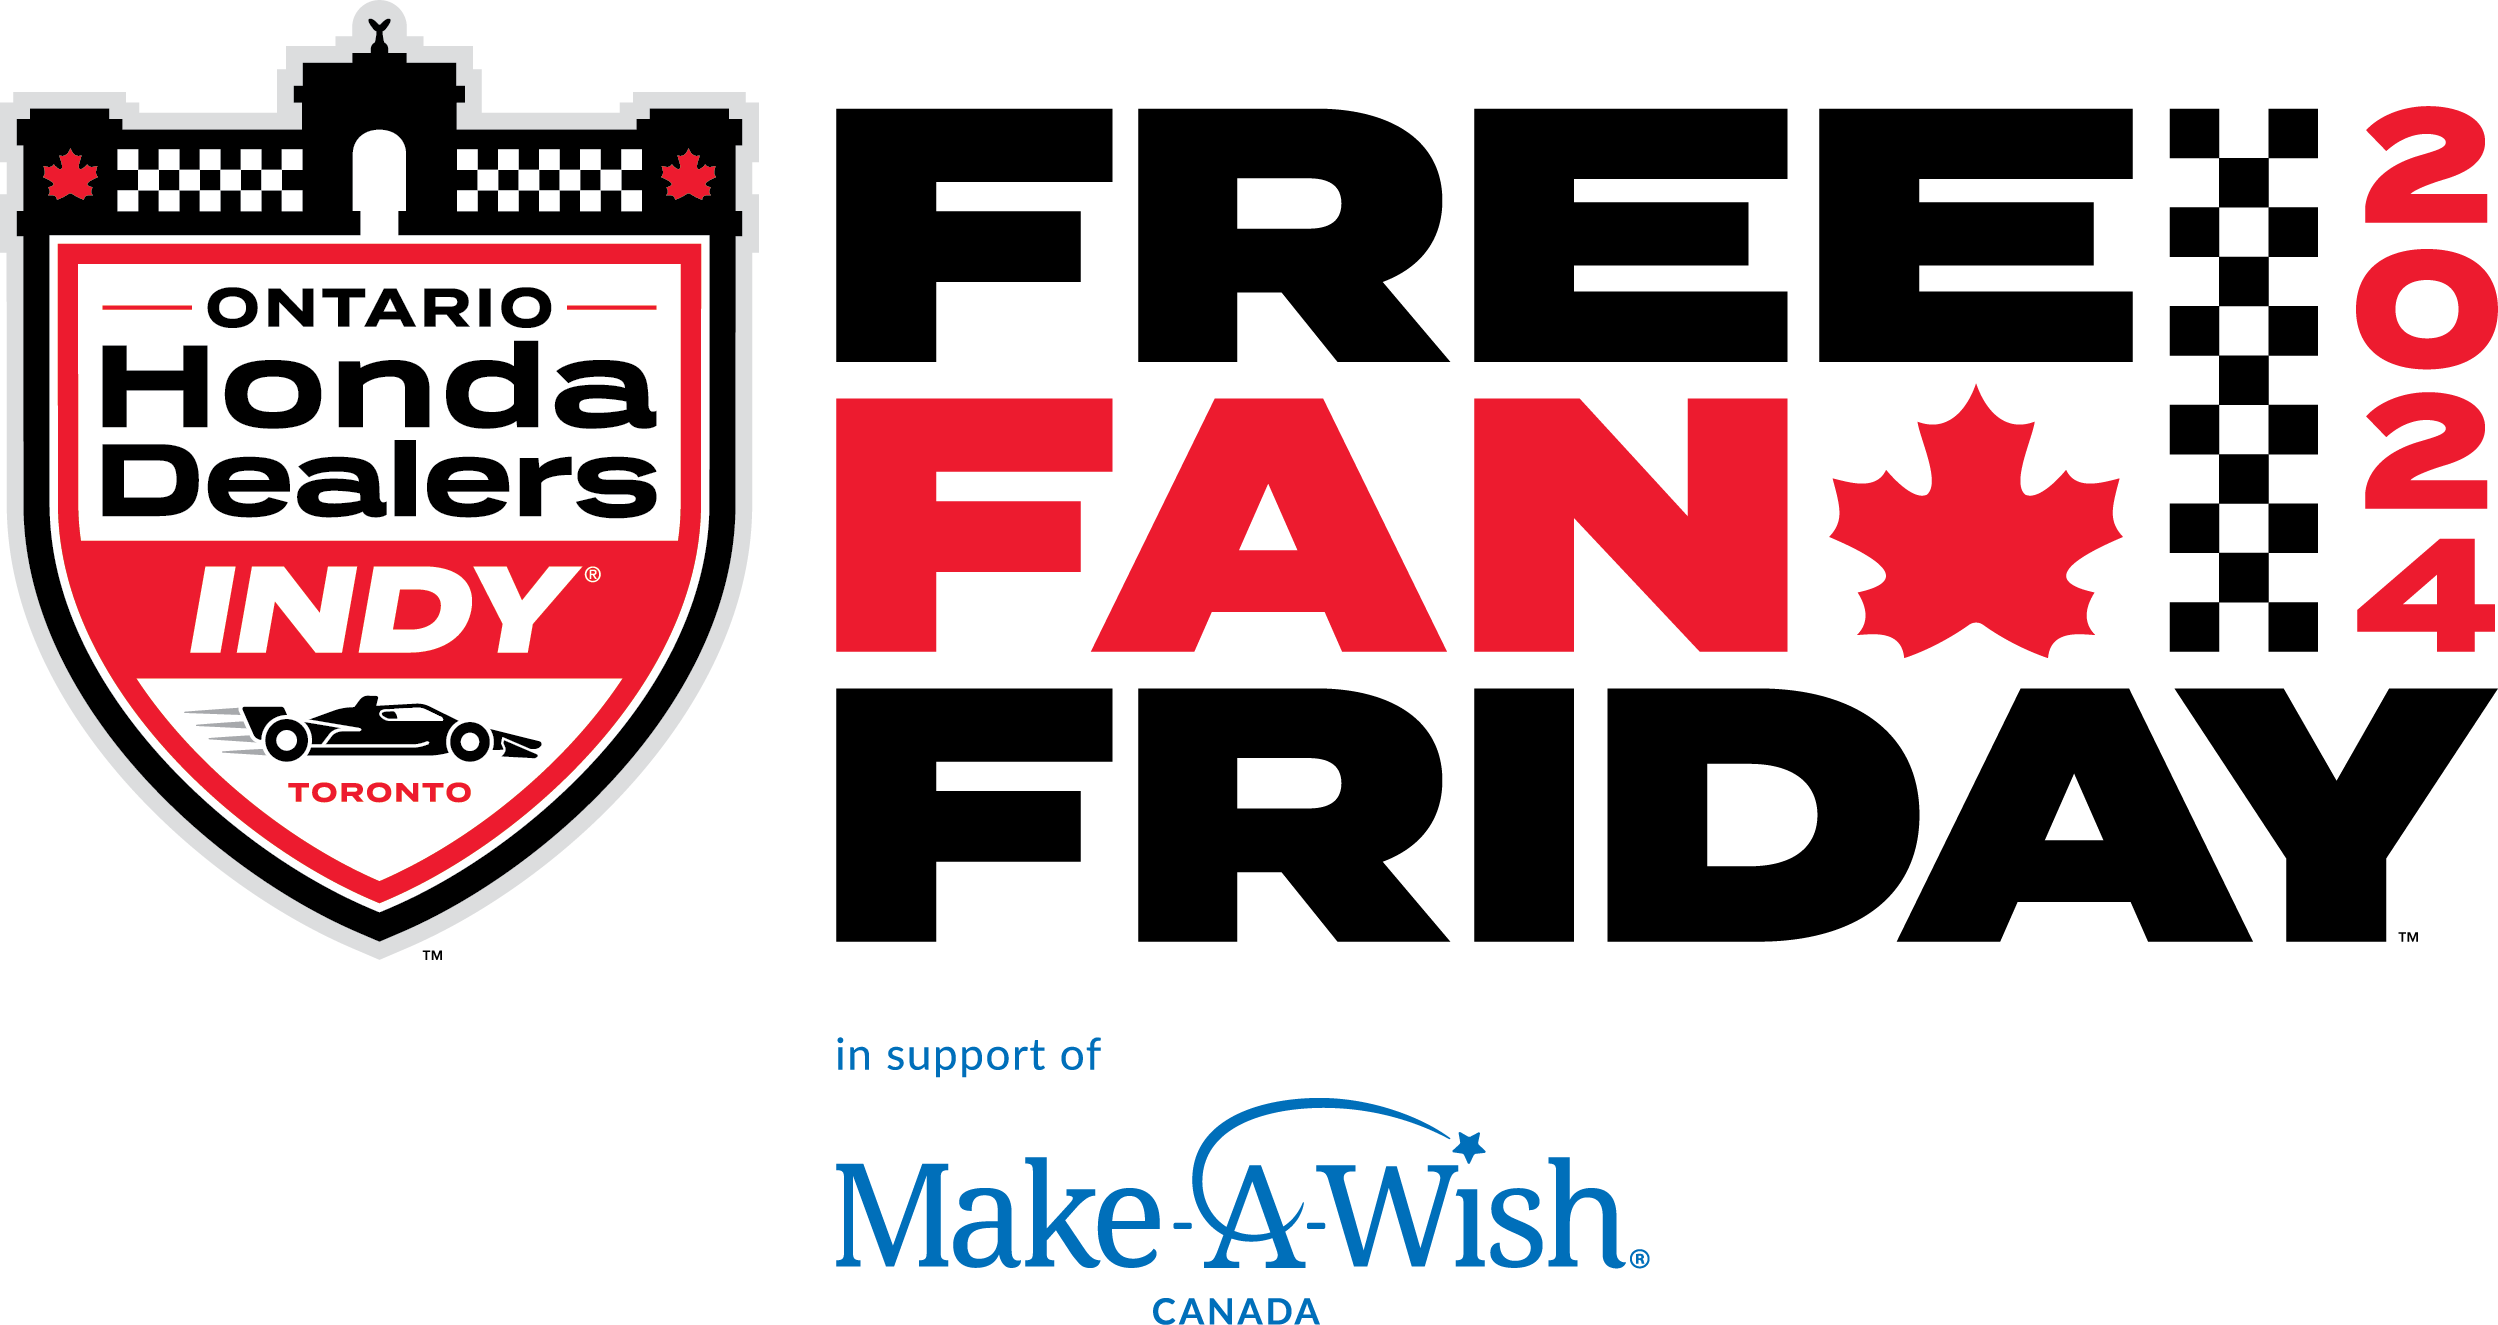 Your Ontario Honda Dealers Present Free Fan Friday in Support of Make-A-Wish® Canada Launches Action-Packed Toronto Race Weekend